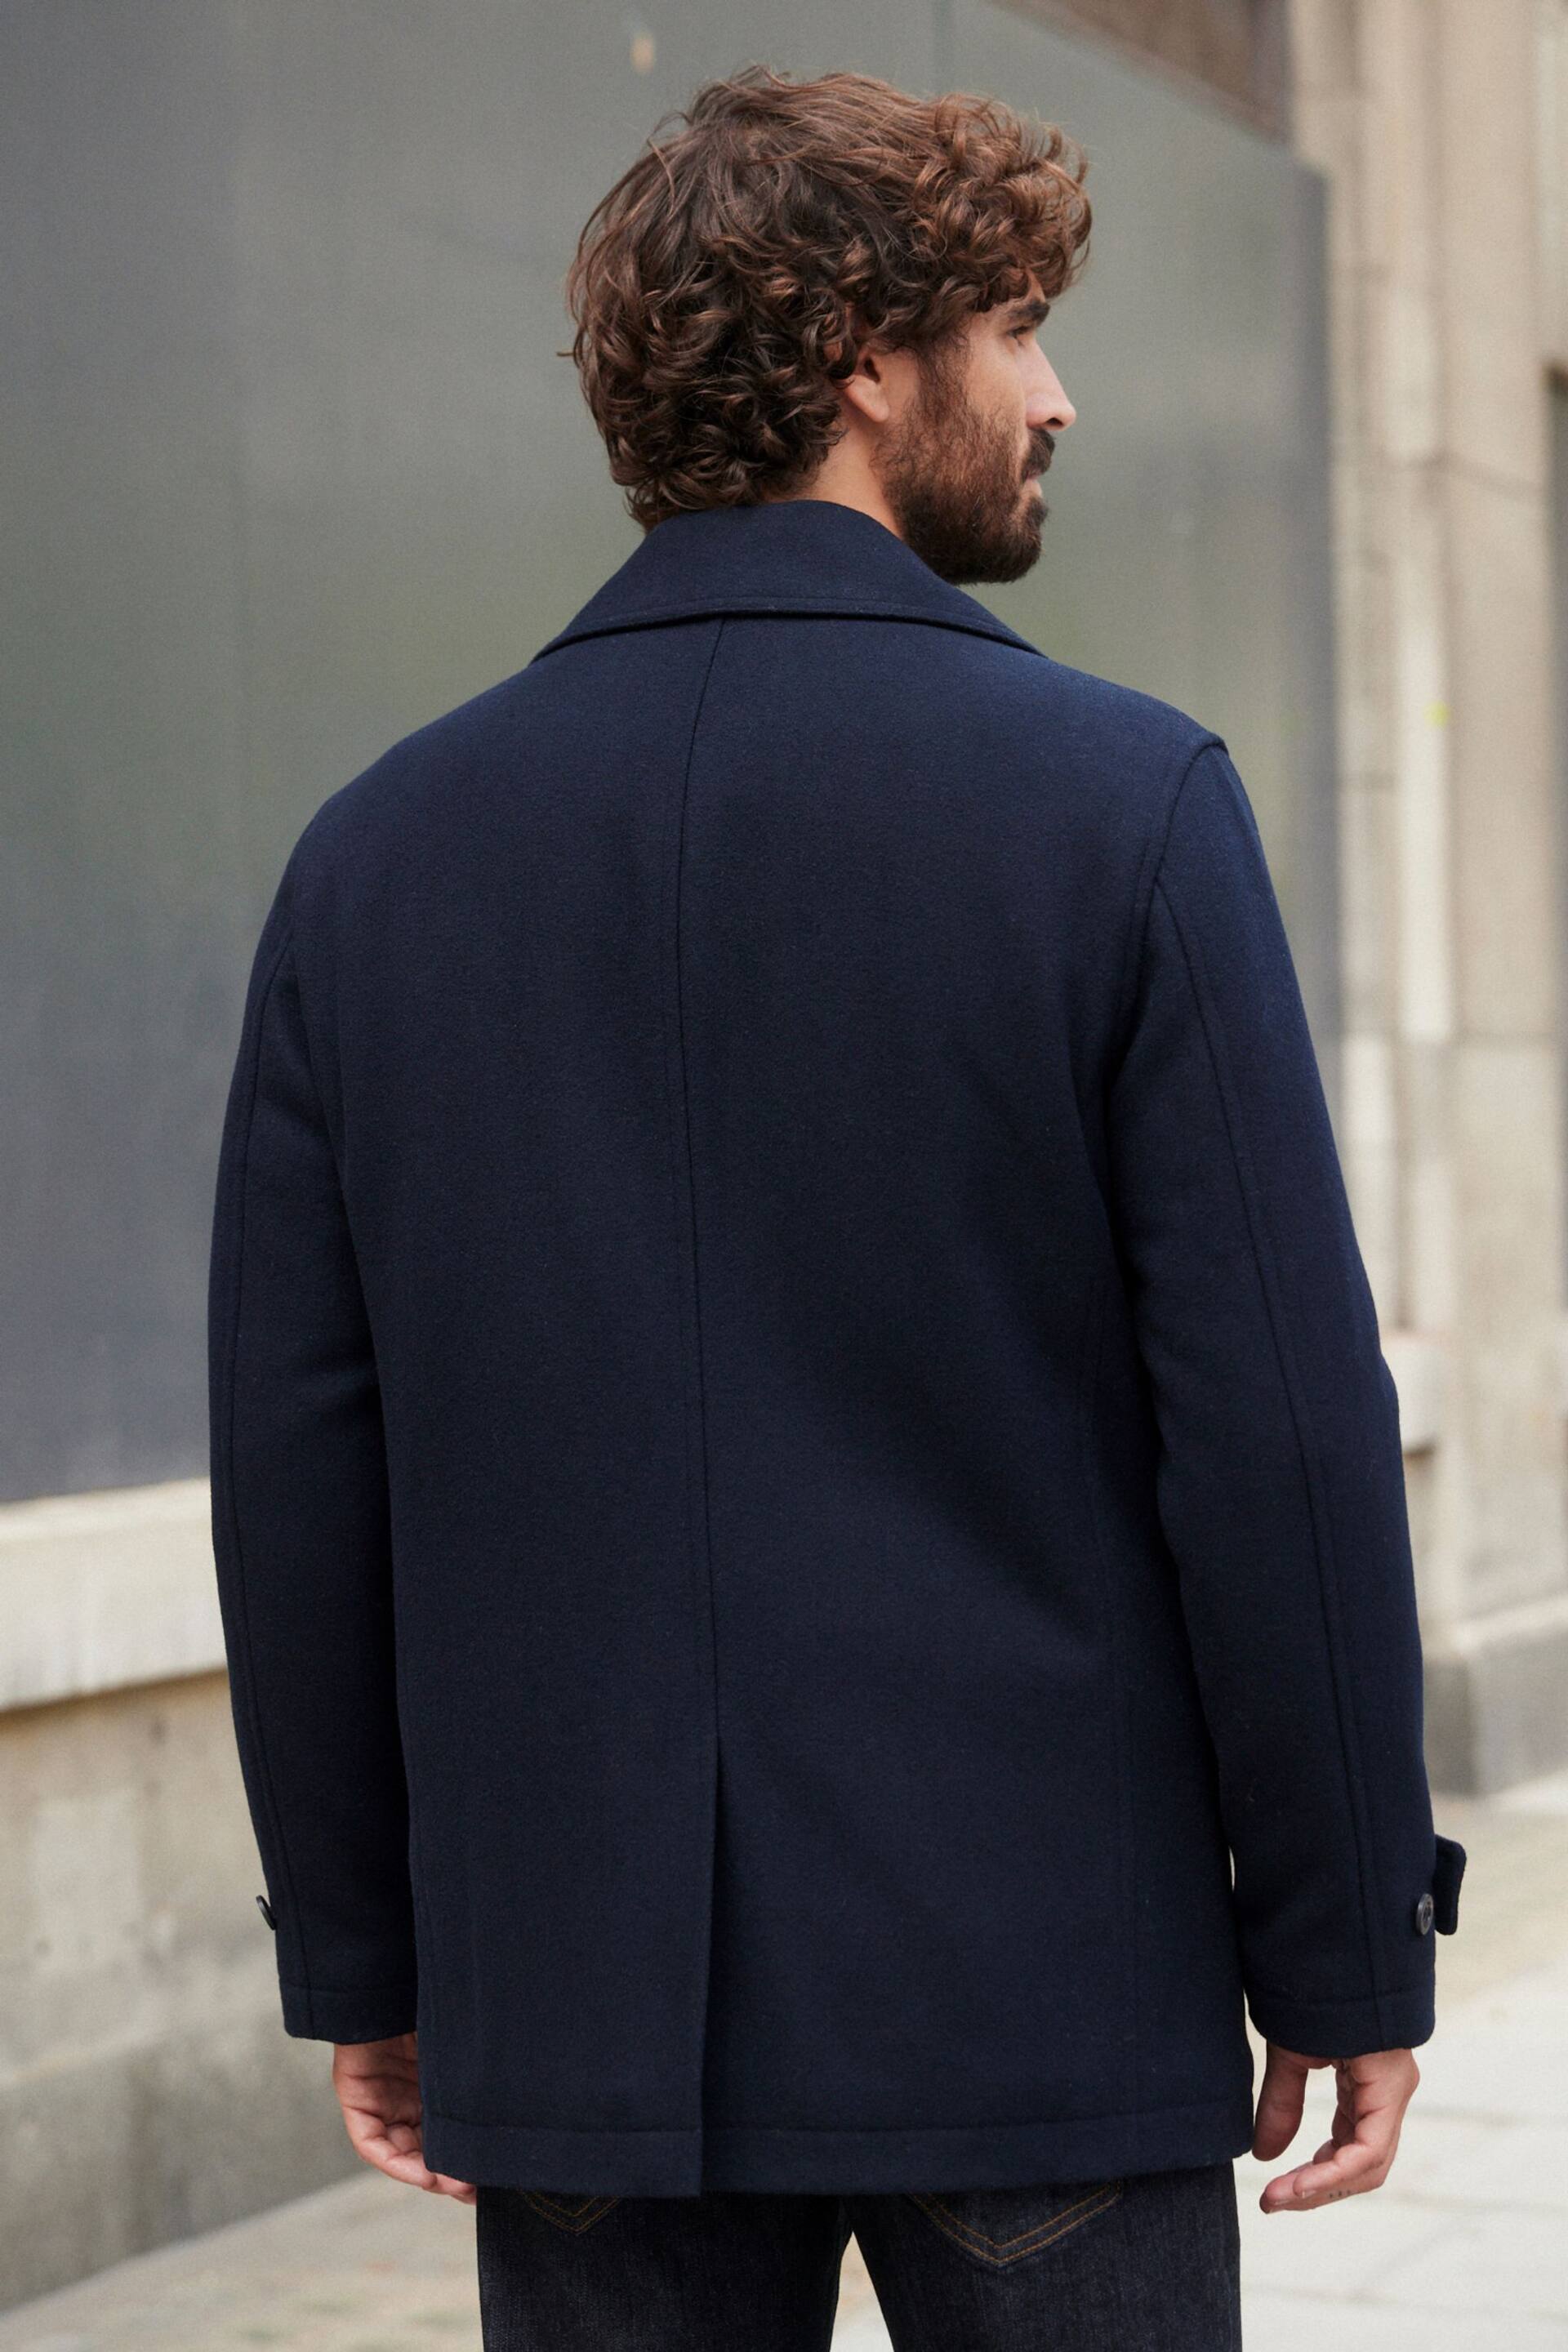 Navy Blue Wool Rich Double Breasted Peacoat - Image 4 of 12